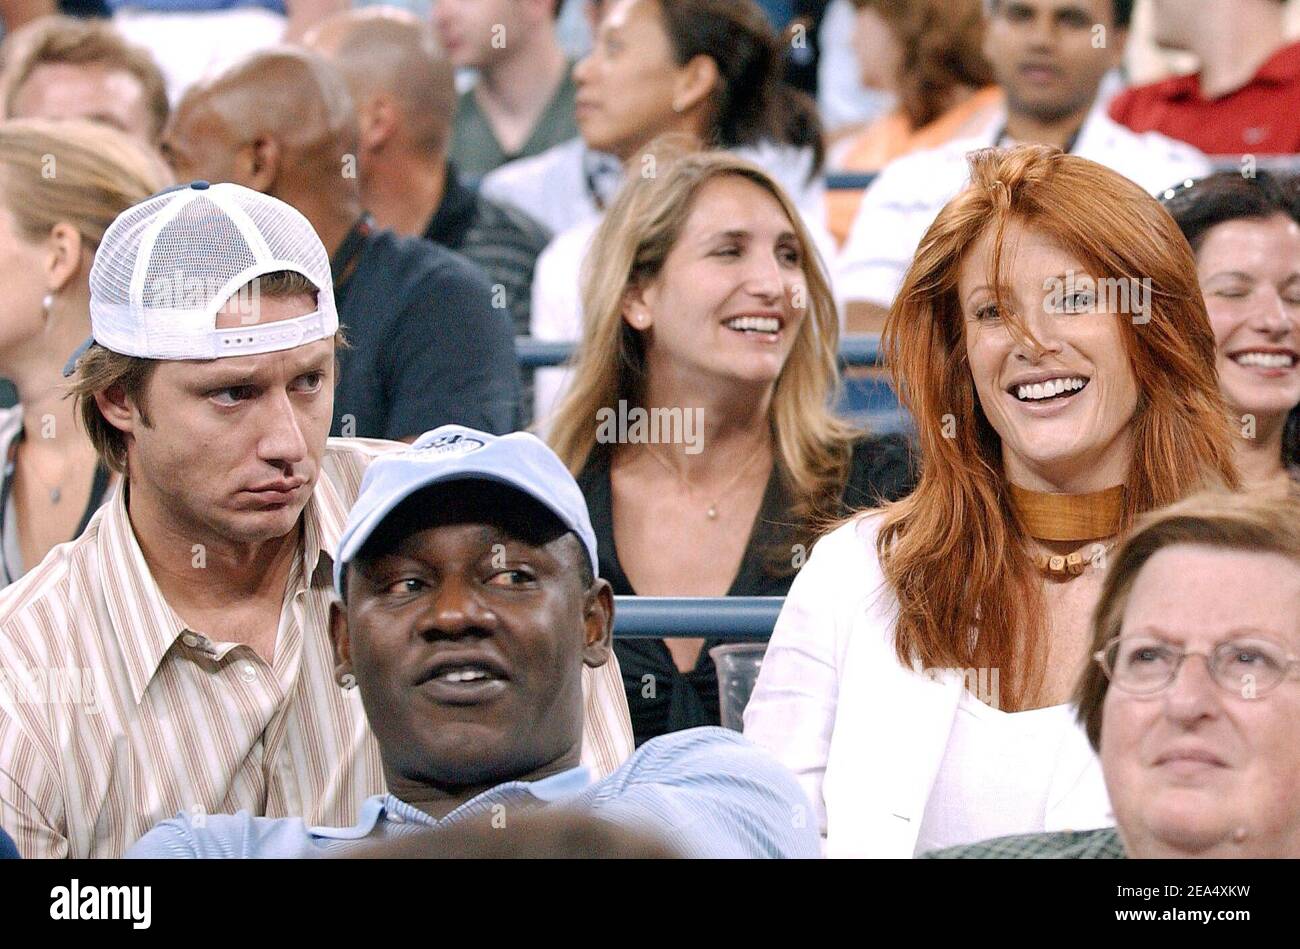 Angie Everhart and her boyfriend attend the 2005 US Open tennis tournament, held at the Arthur Ashe Stadium in Flushing Meadows, New York, on September 1, 2005. Photo by Nicolas Khayat/ABACAPRESS.COM Stock Photo